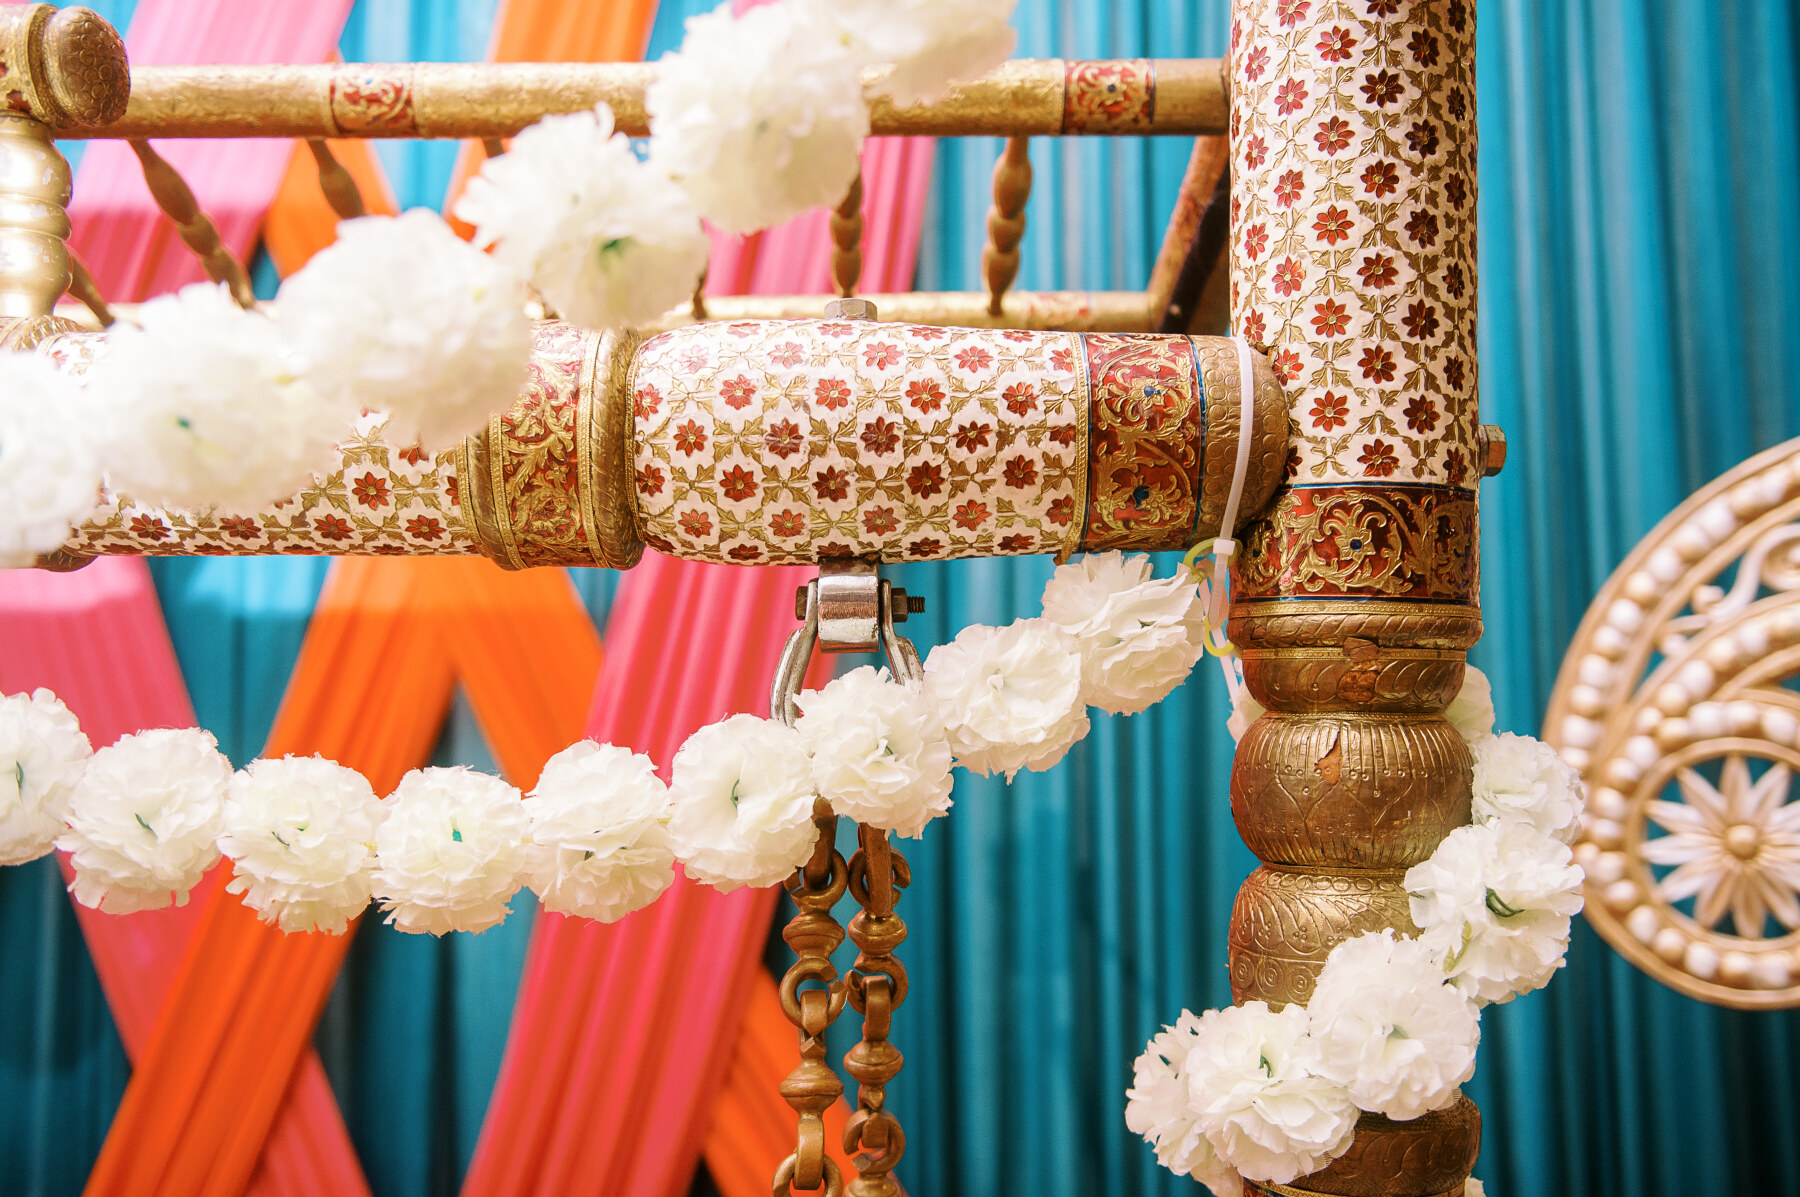 Ananya + Harsh Sangeet decor backdrop from Katen Shah Designs captured by Jamie Vinson Photography